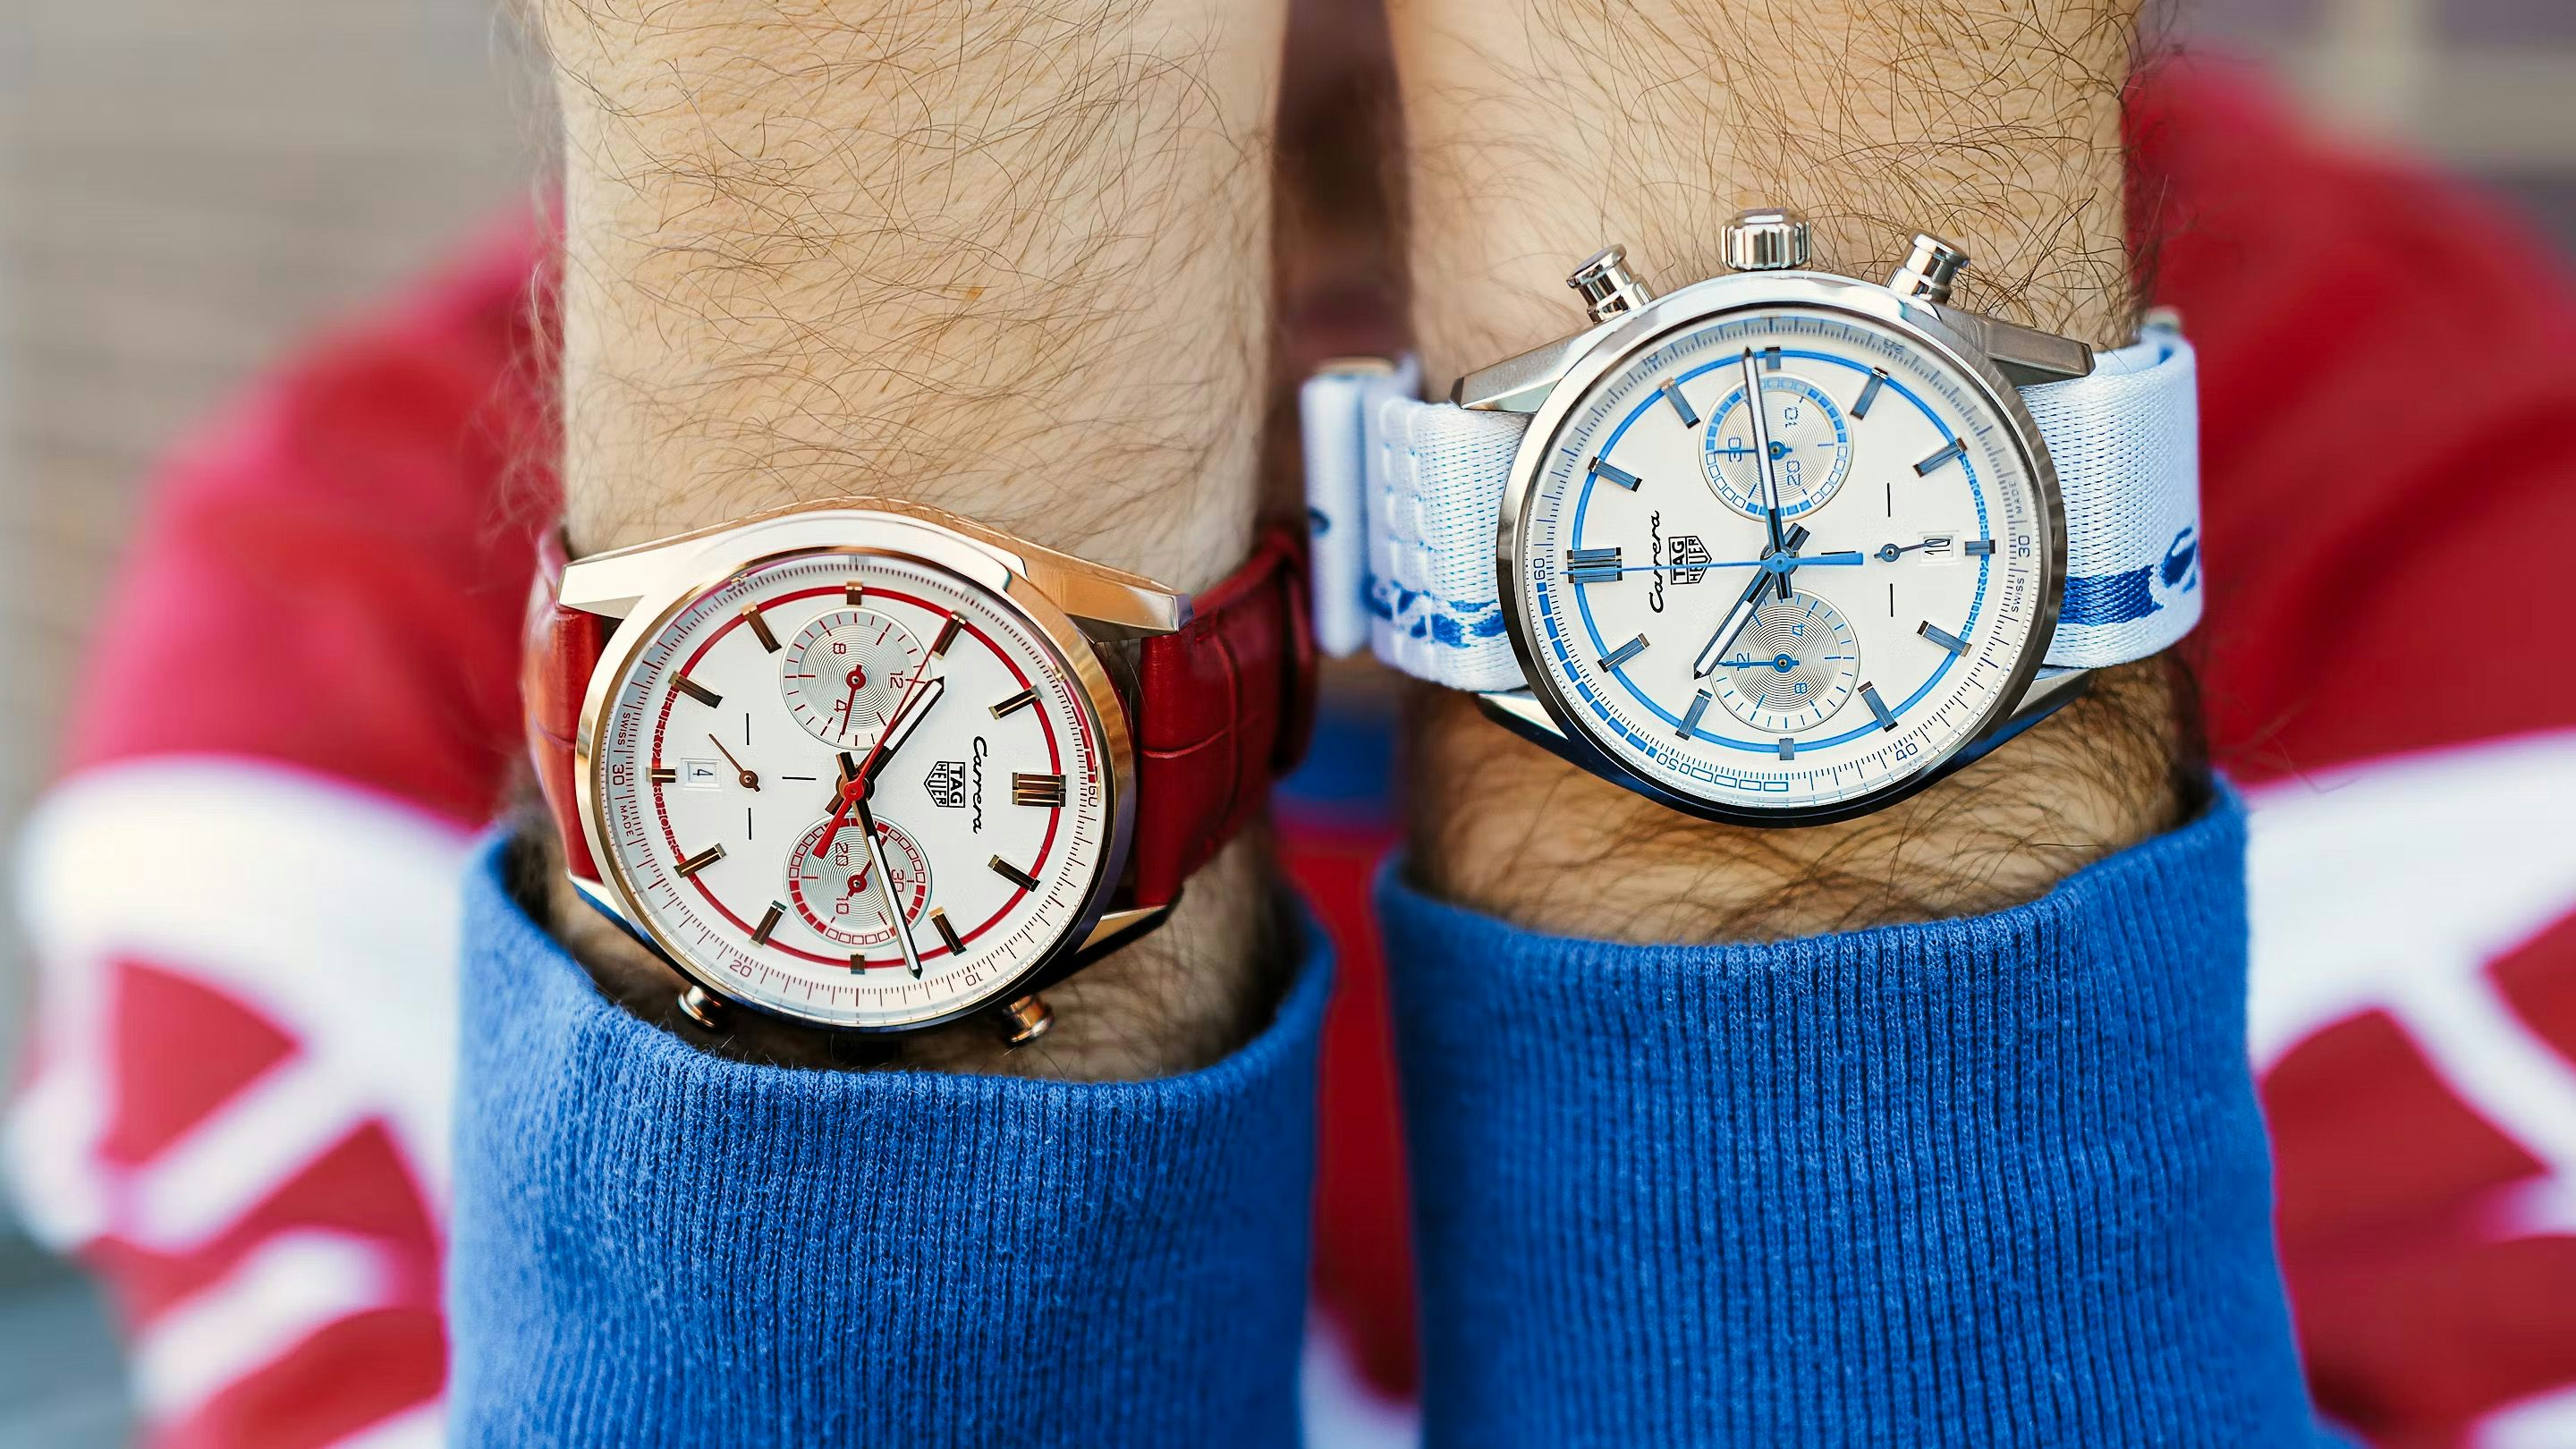 The TAG Heuer Porsche Carrera 911 RS 2.7 Watches in red and blue on wrist 